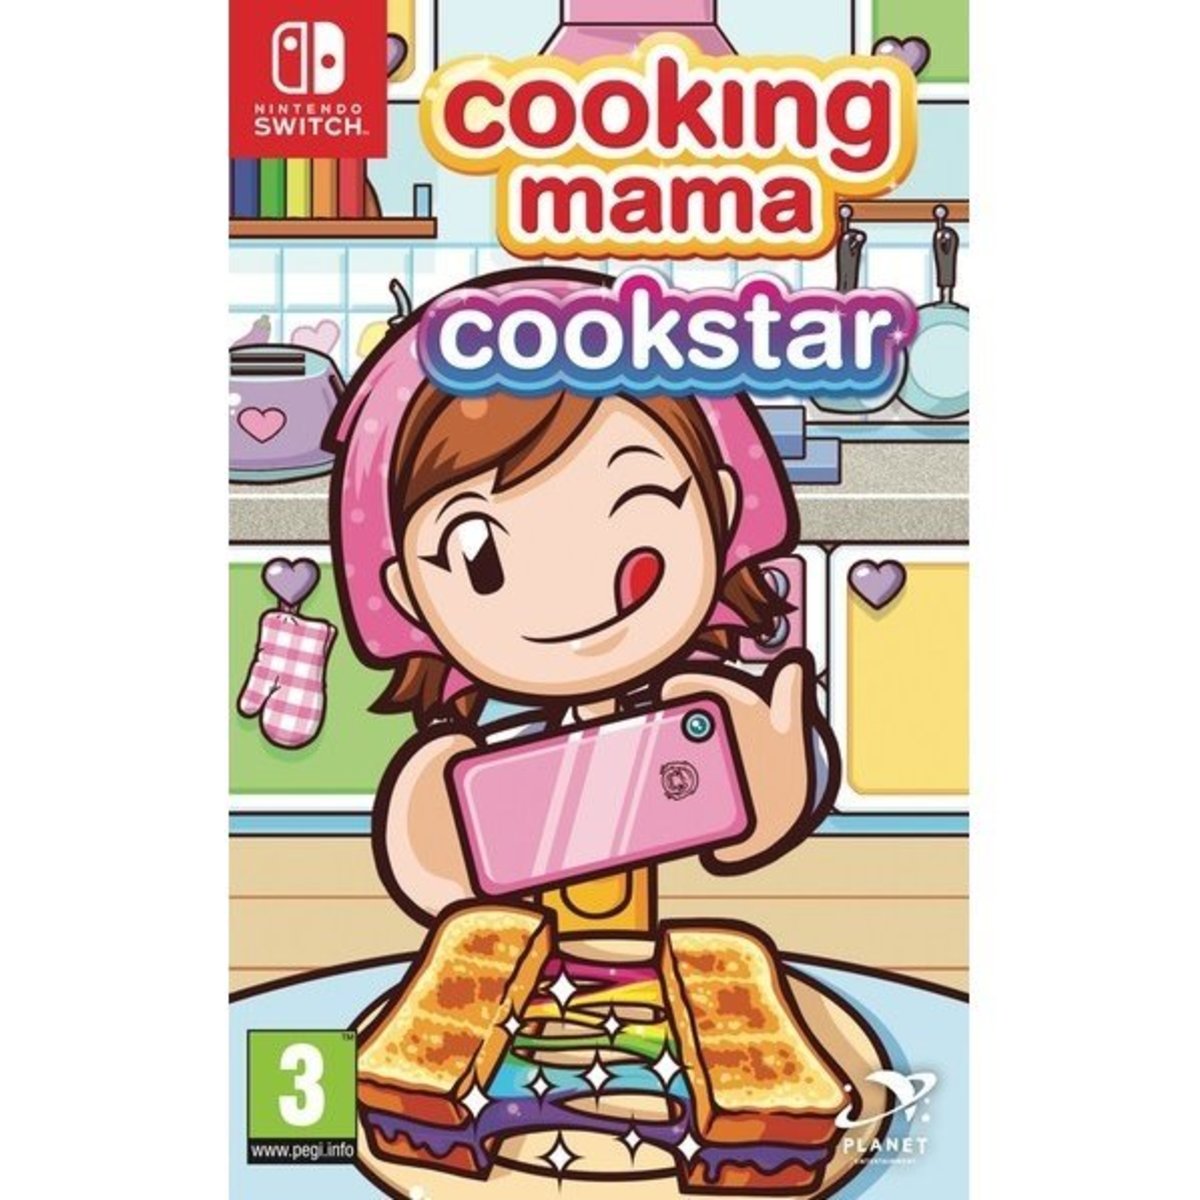 Switch Game - COOKING MAMA: COOKSTAR